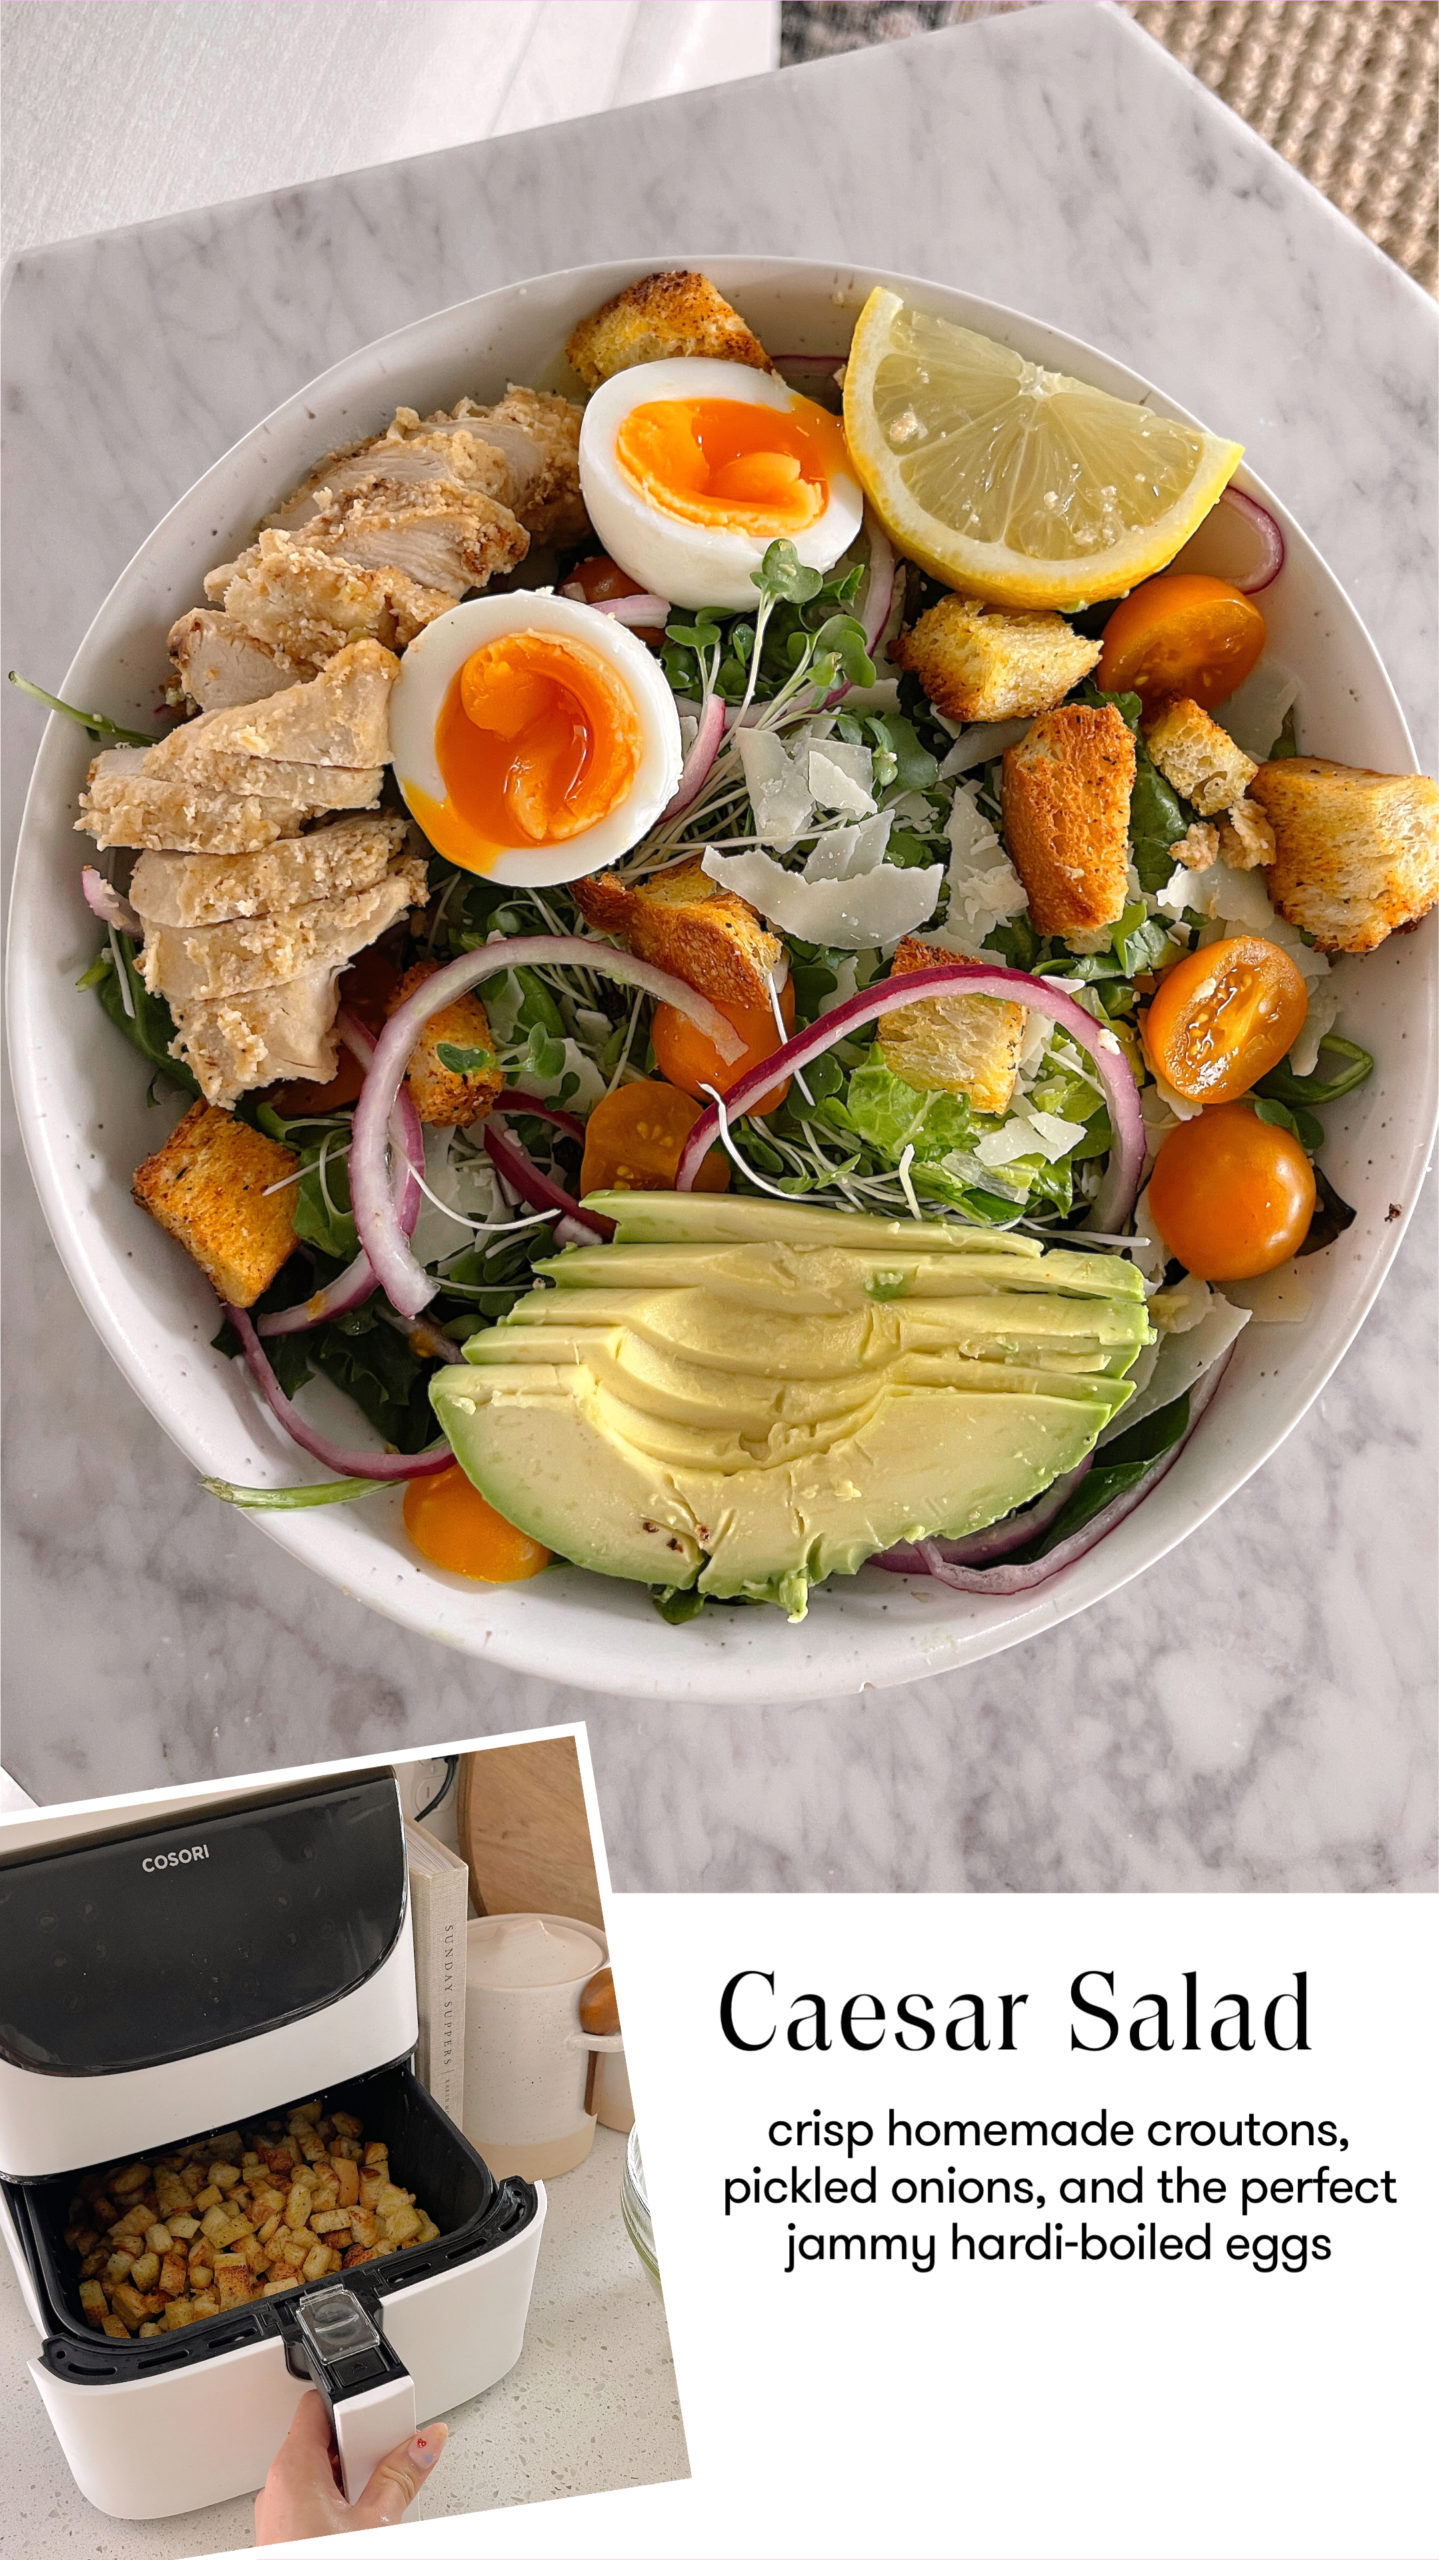 Caesar Salad Recipe with Homemade Croutons and Jammy Eggs 2